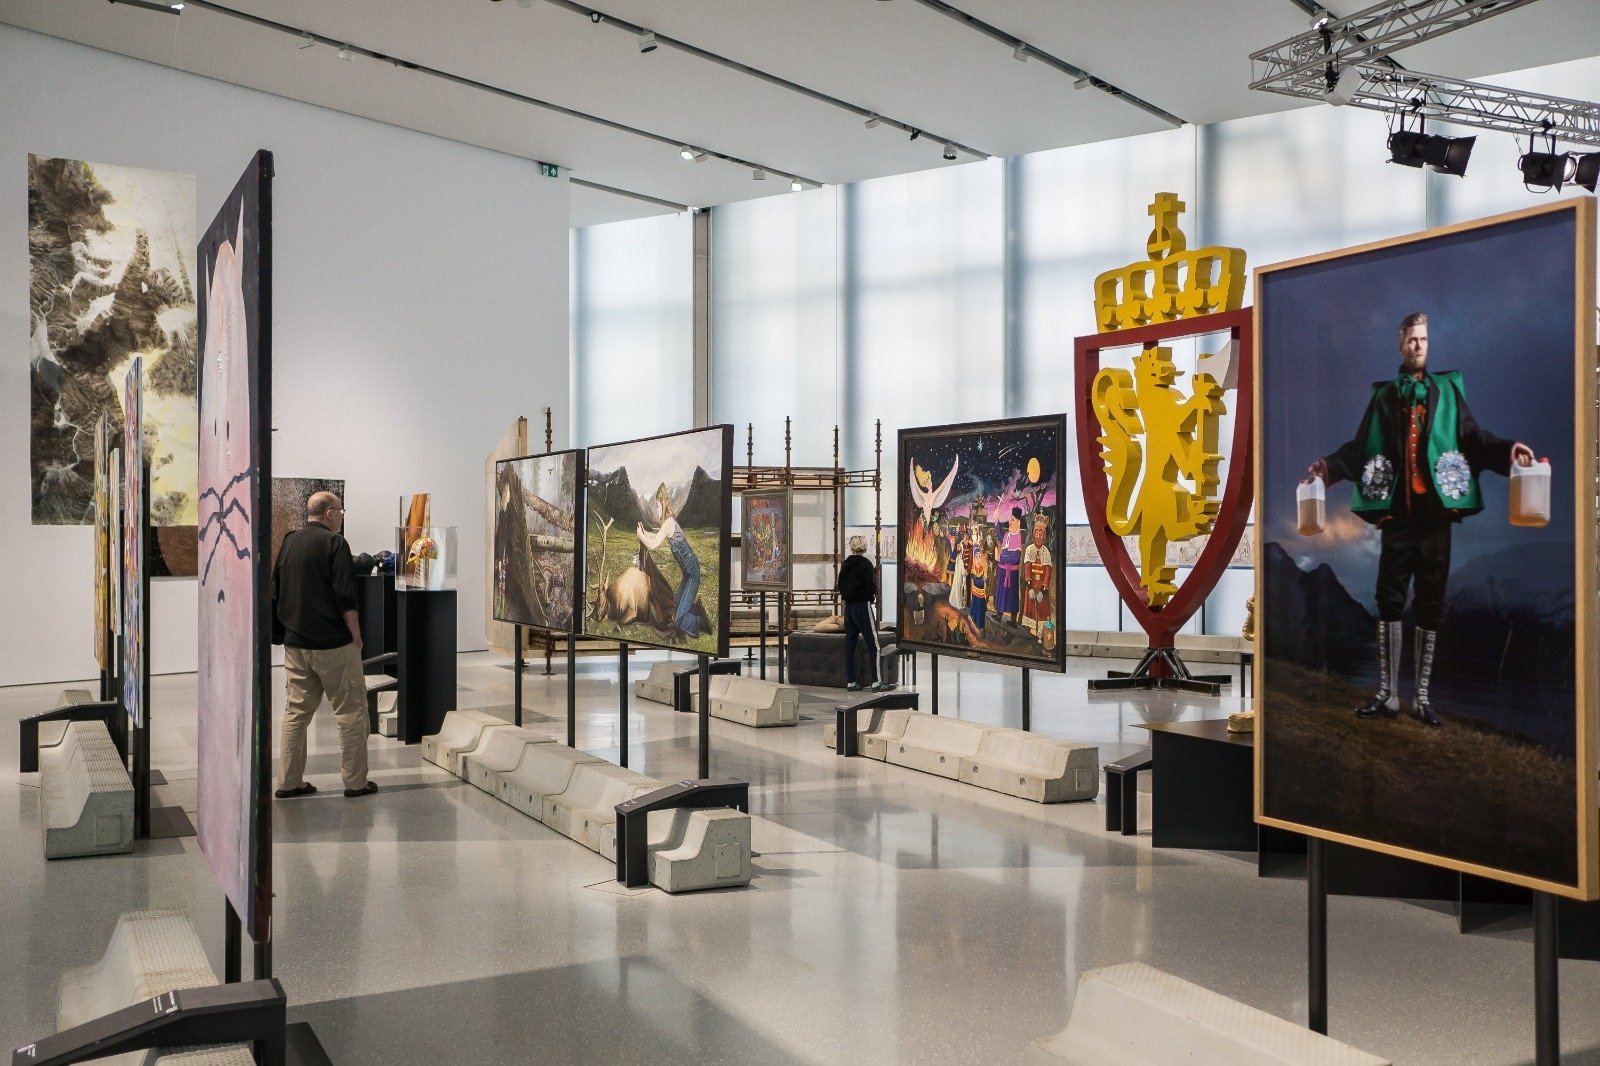 In the National Museum of Oslo, 6,500 works are exhibited across 86 rooms. (DPA Photo)